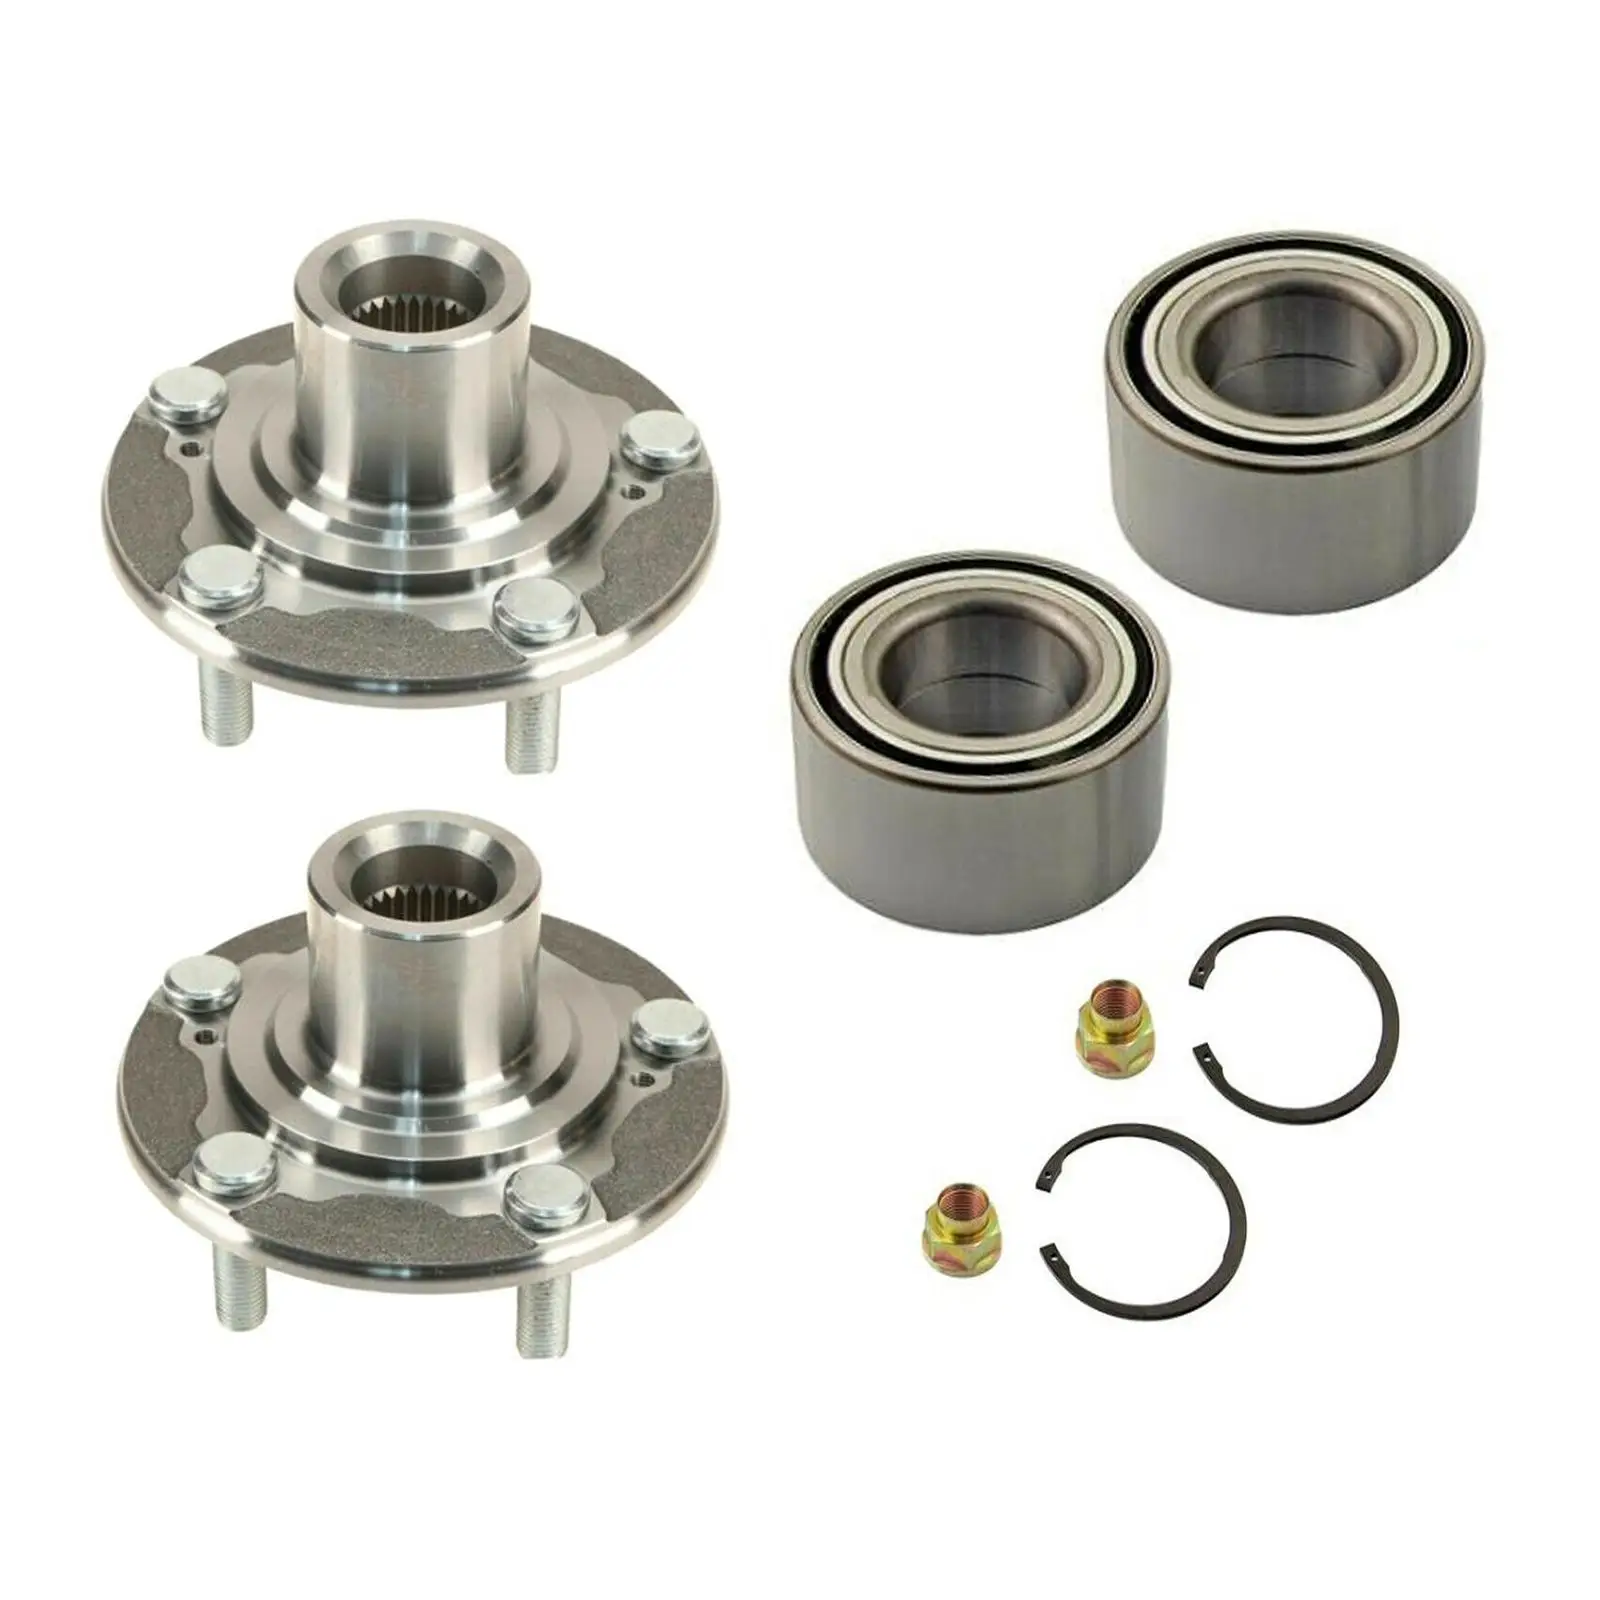 2 Pieces Front Wheel Hub Bearing Kits Replacement Assembly Easy Installation Durable Spare Parts 510118 for Honda Accord